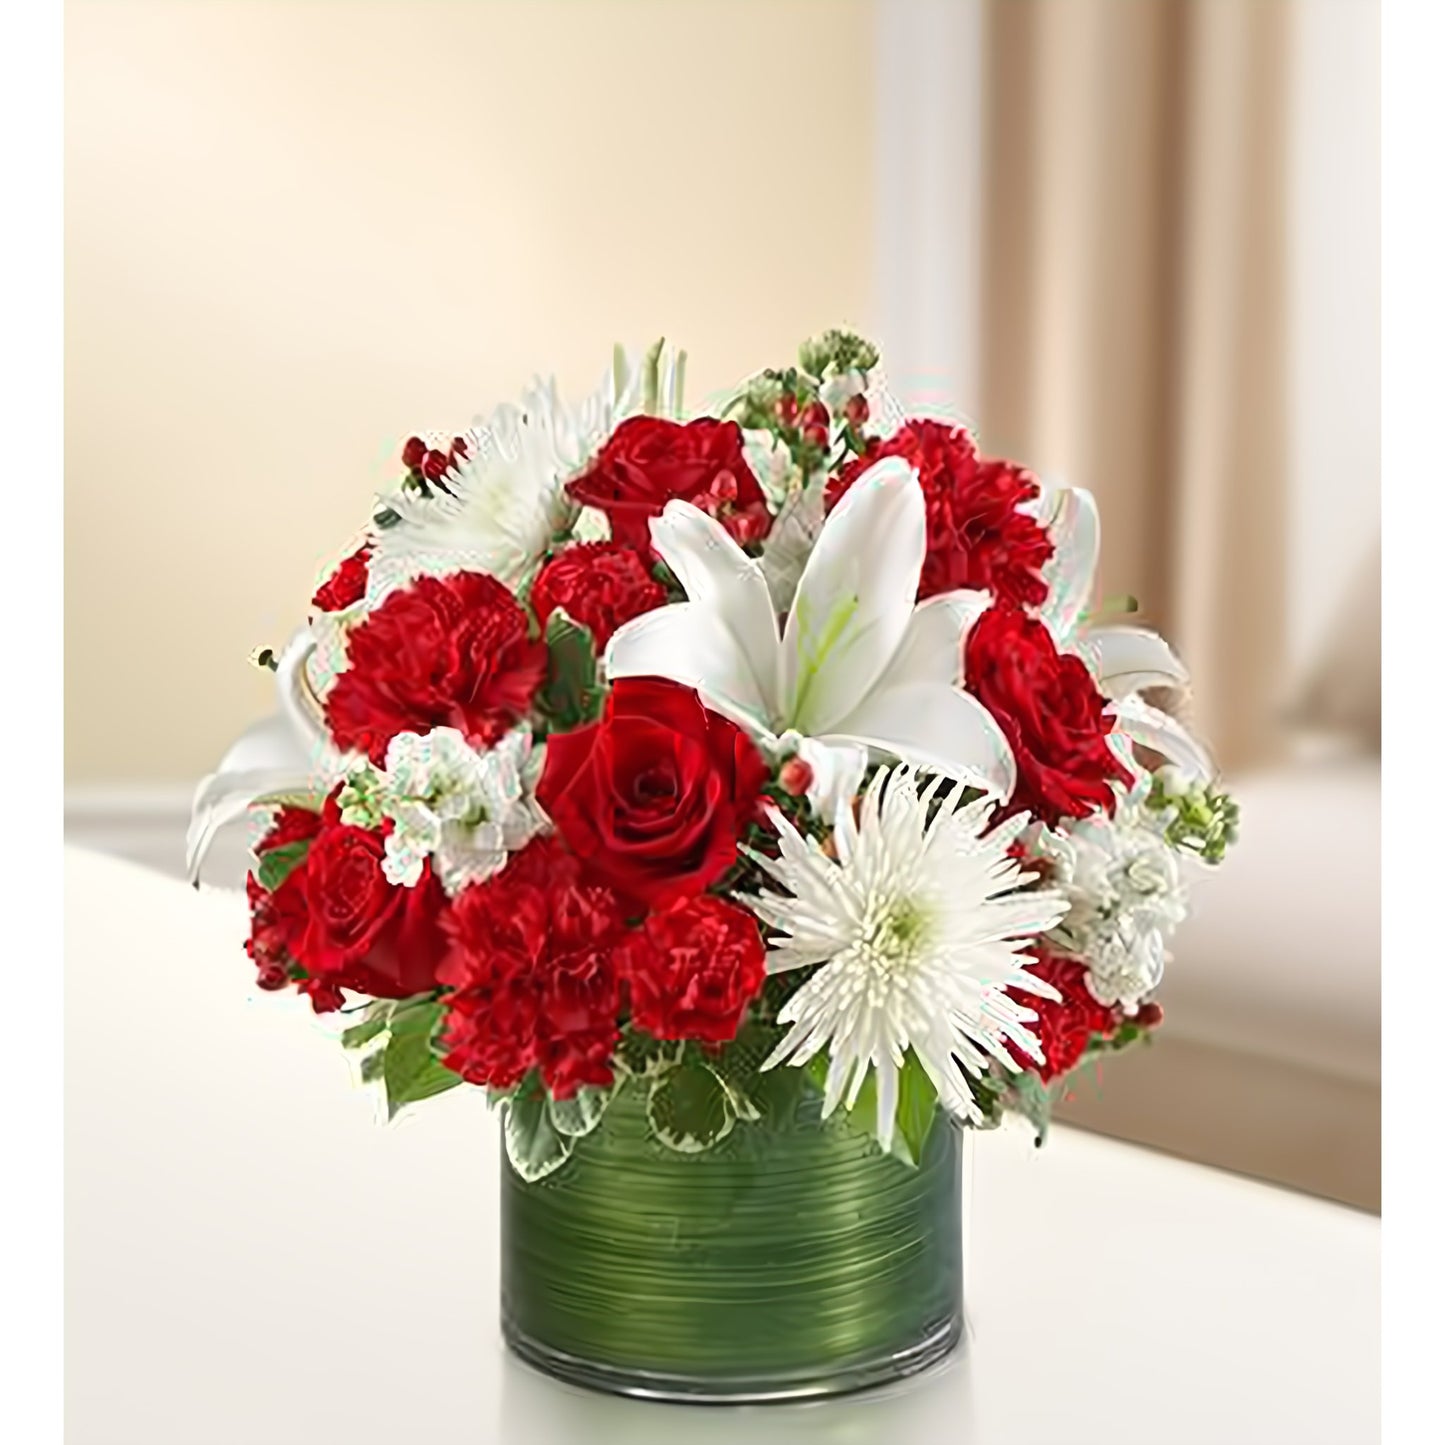 Cherished Memories - Red and White - Funeral > Vase Arrangements - Queens Flower Delivery